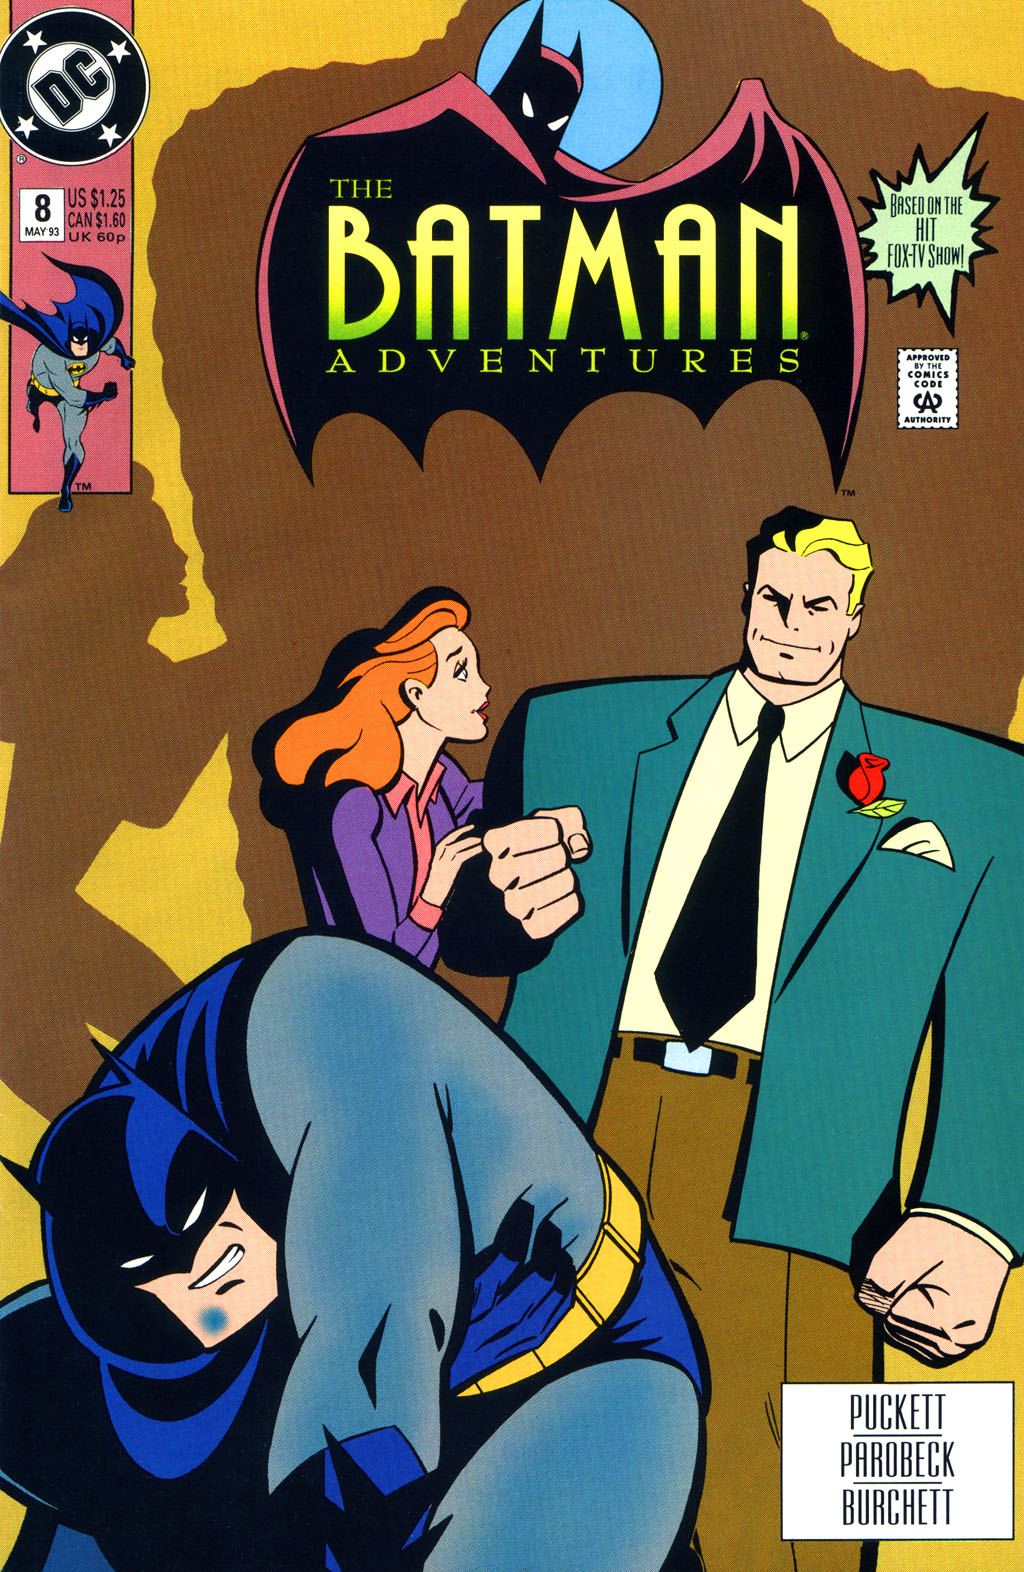 The Batman Adventures Issue 8 | Read The Batman Adventures Issue 8 comic  online in high quality. Read Full Comic online for free - Read comics online  in high quality .|